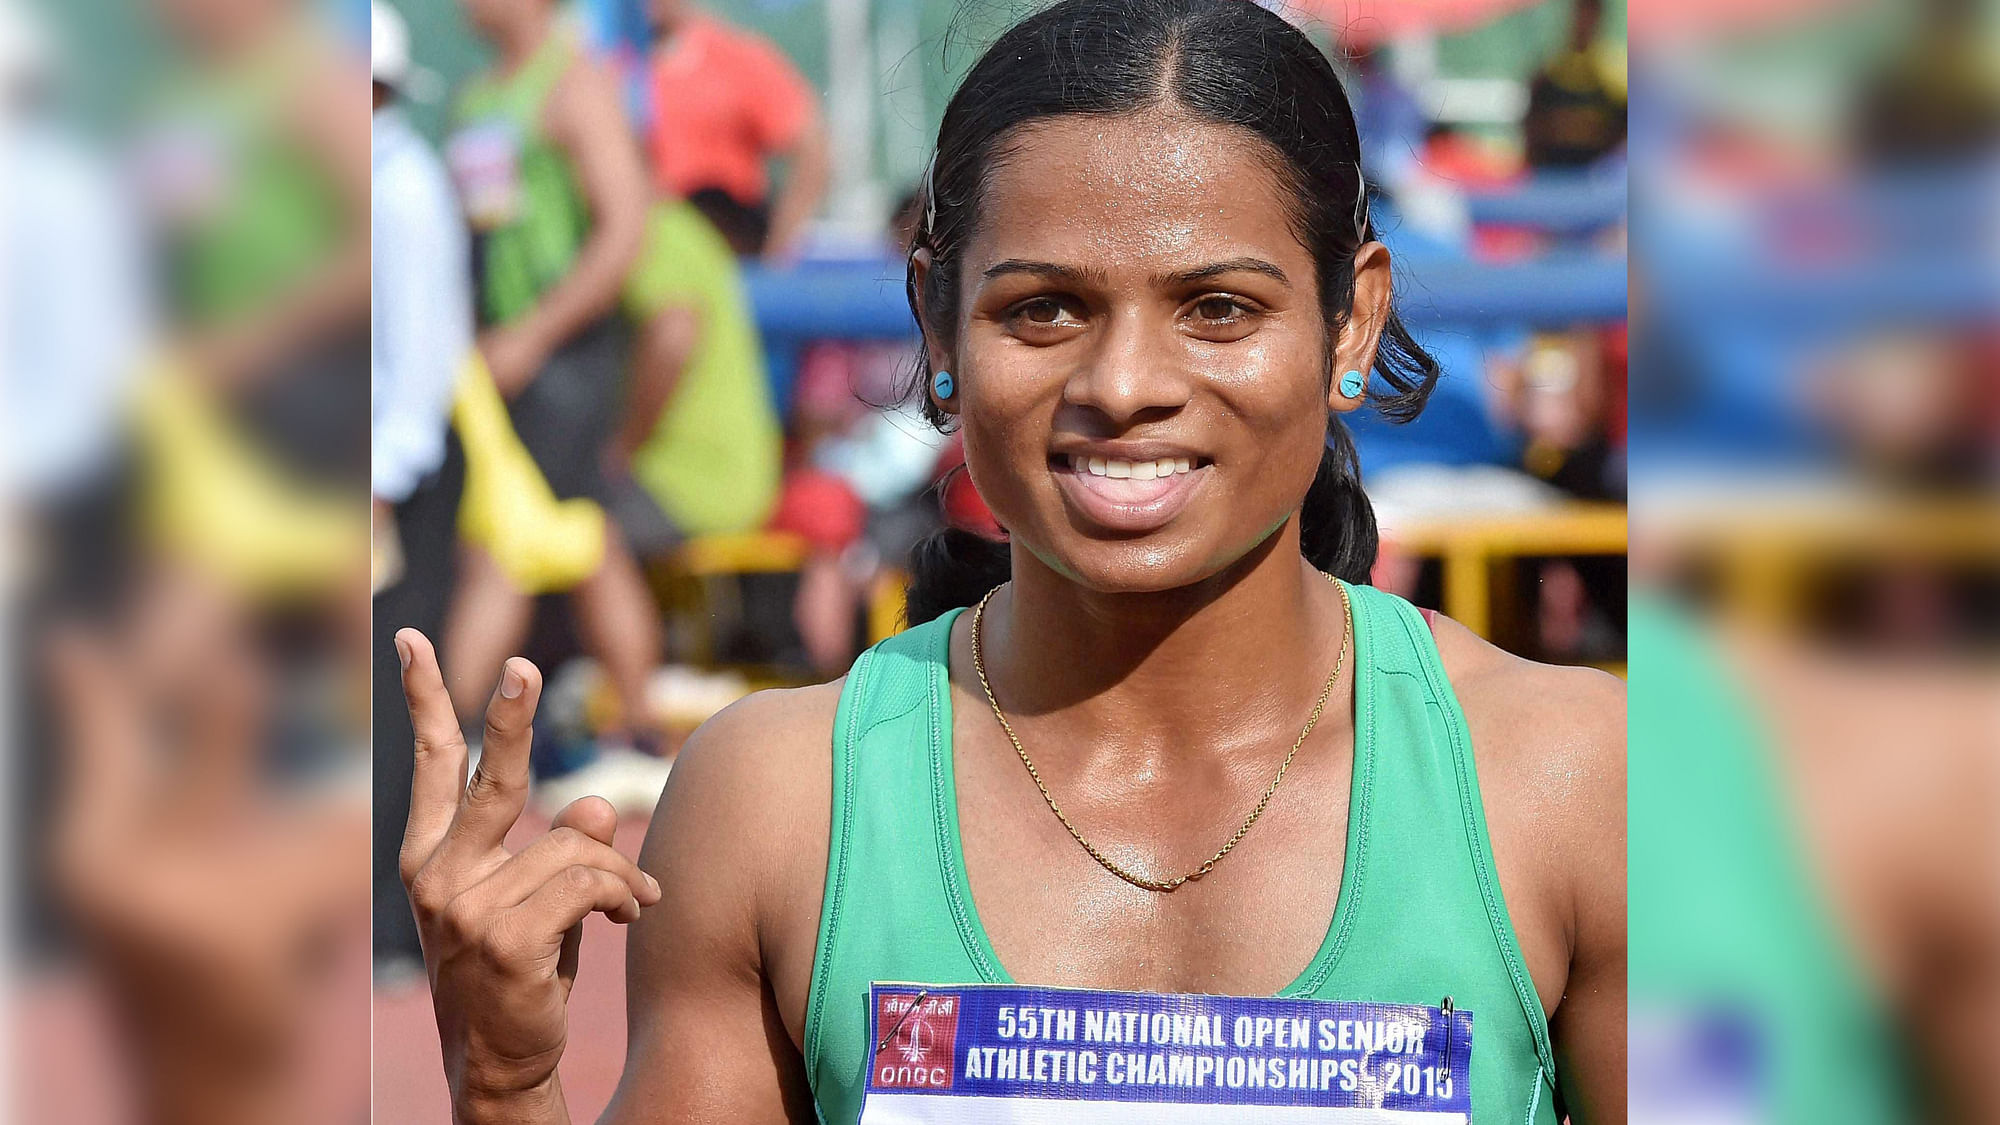 Dutee Chand celebrates after winning the Women’s 100m race during 55th National Open Athletic Championship.&nbsp;